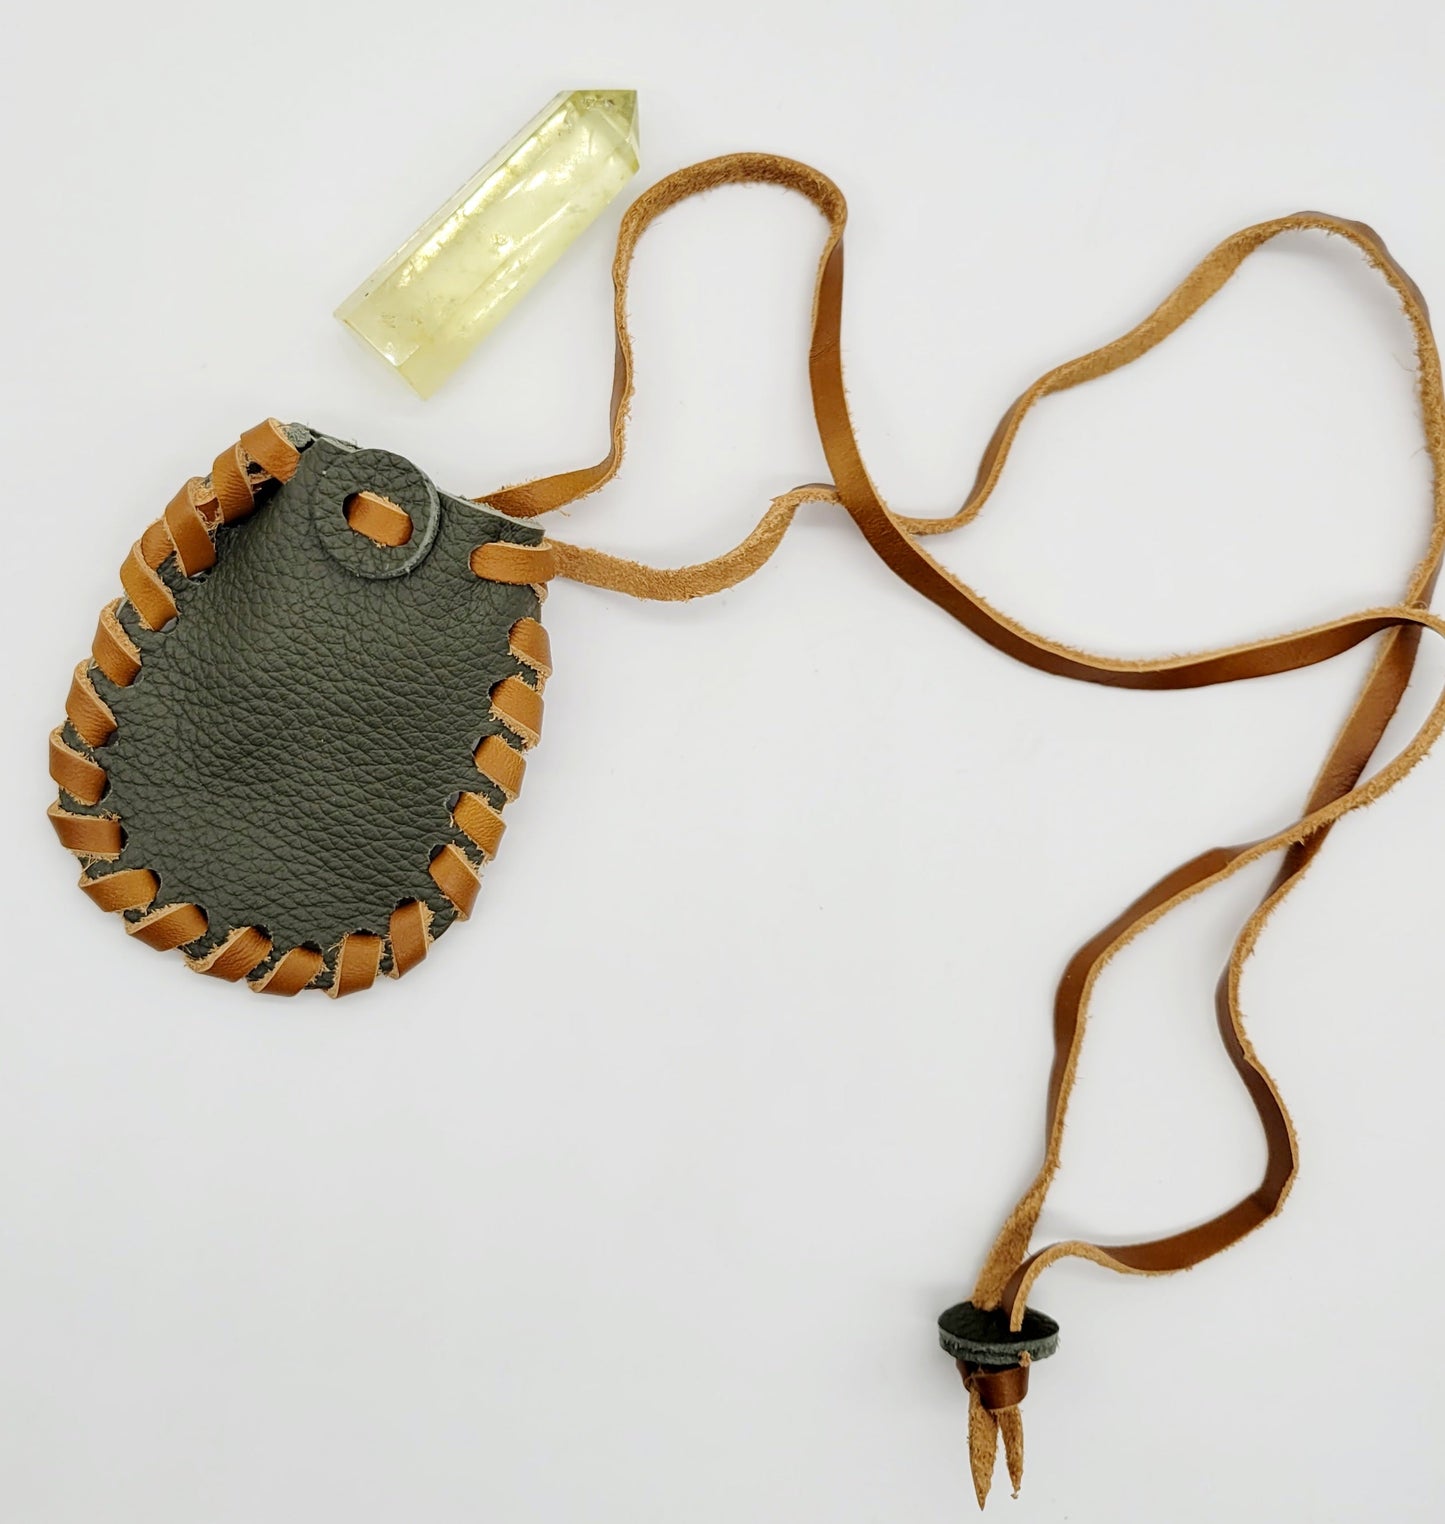 Handmade leather medicine bag with adjustable leather cord(12 pack/ $8 ea.)